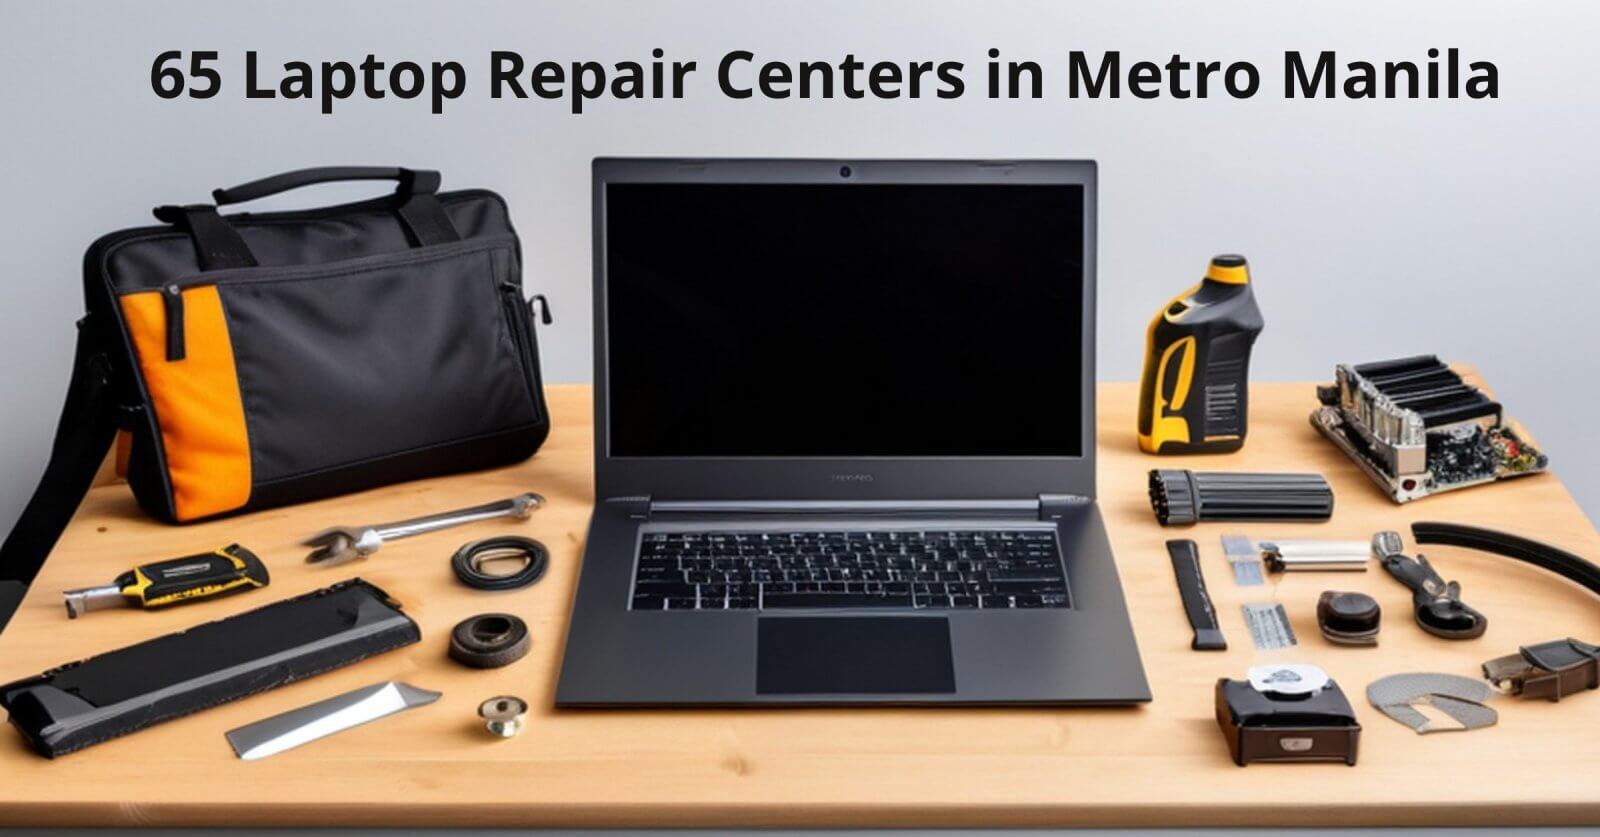 we offer reliable laptop repair services in metro manila, with 65 laptop repair centers conveniently located throughout the area.